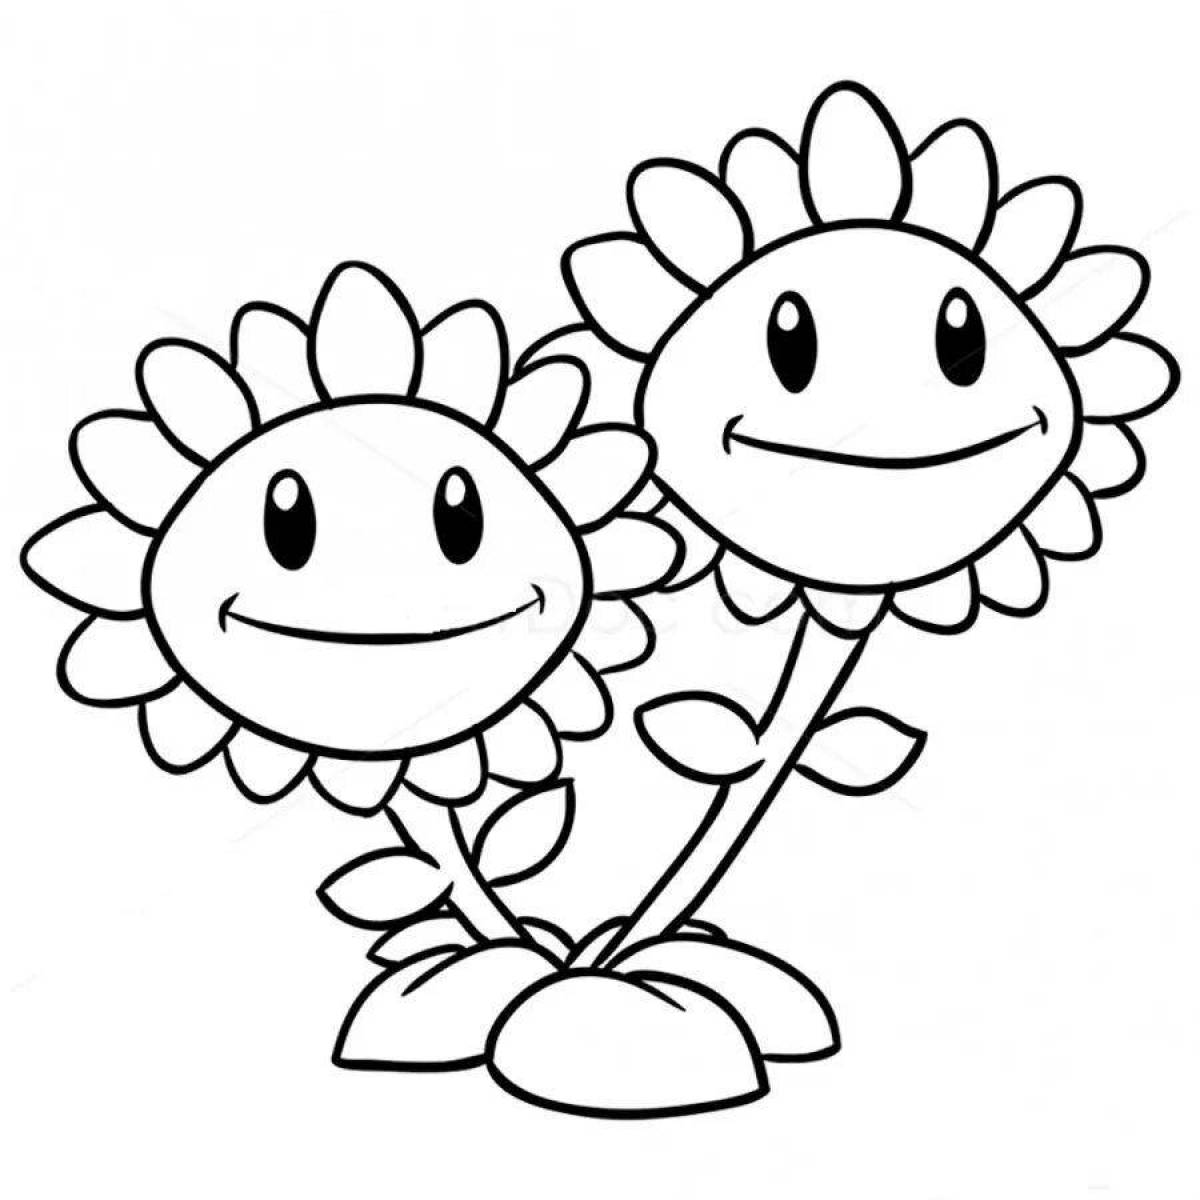 Lovely plants vs zombies 1 plant coloring page